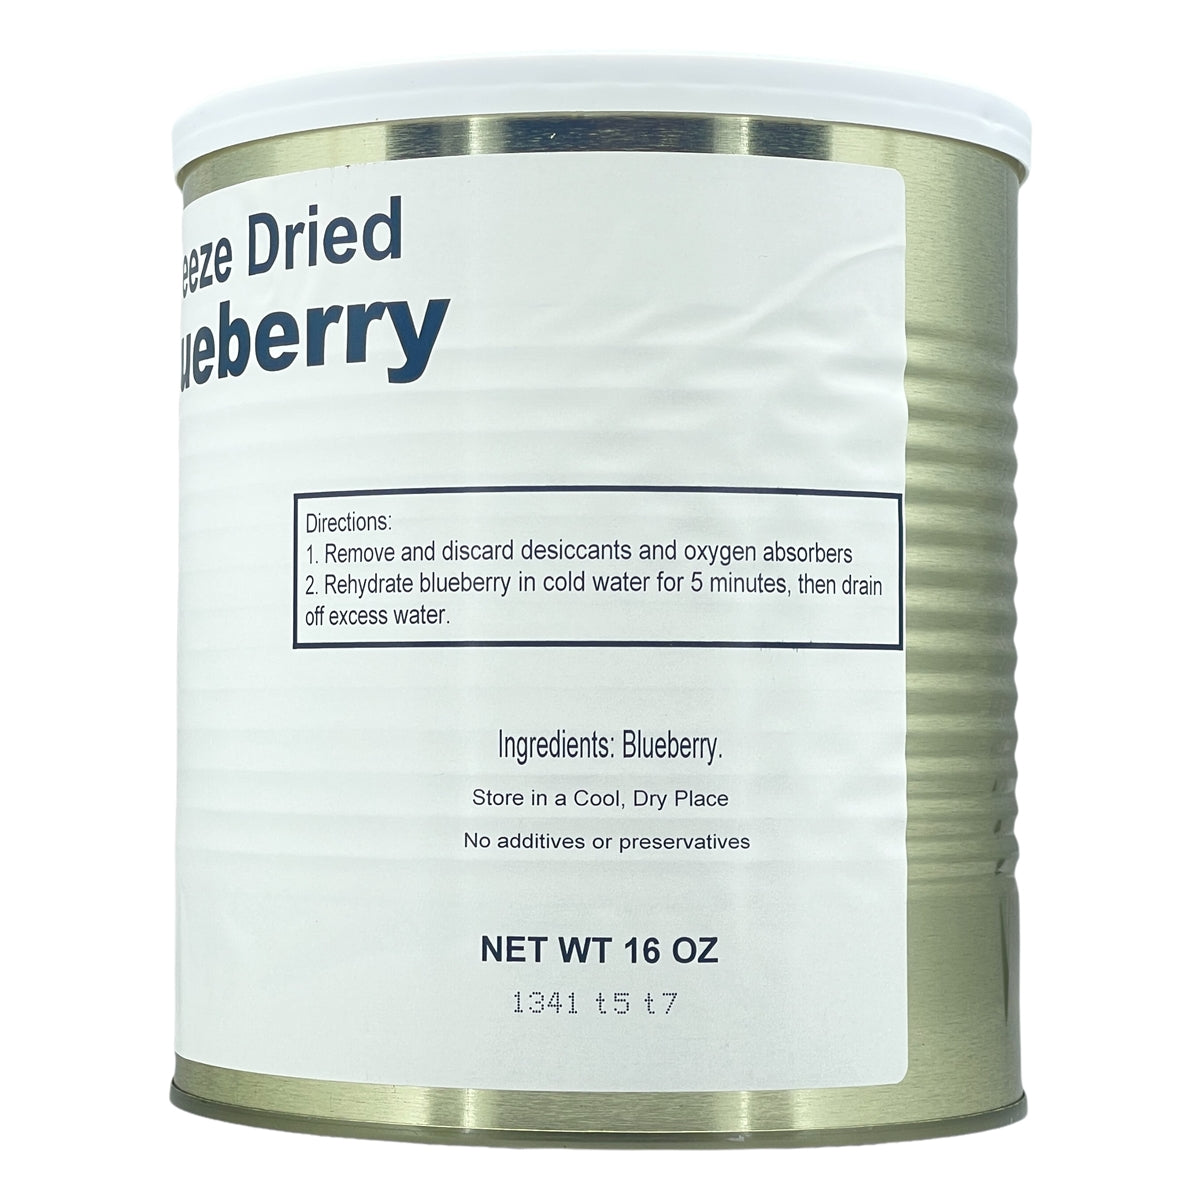 Freeze Dried Military Surplus Blueberries